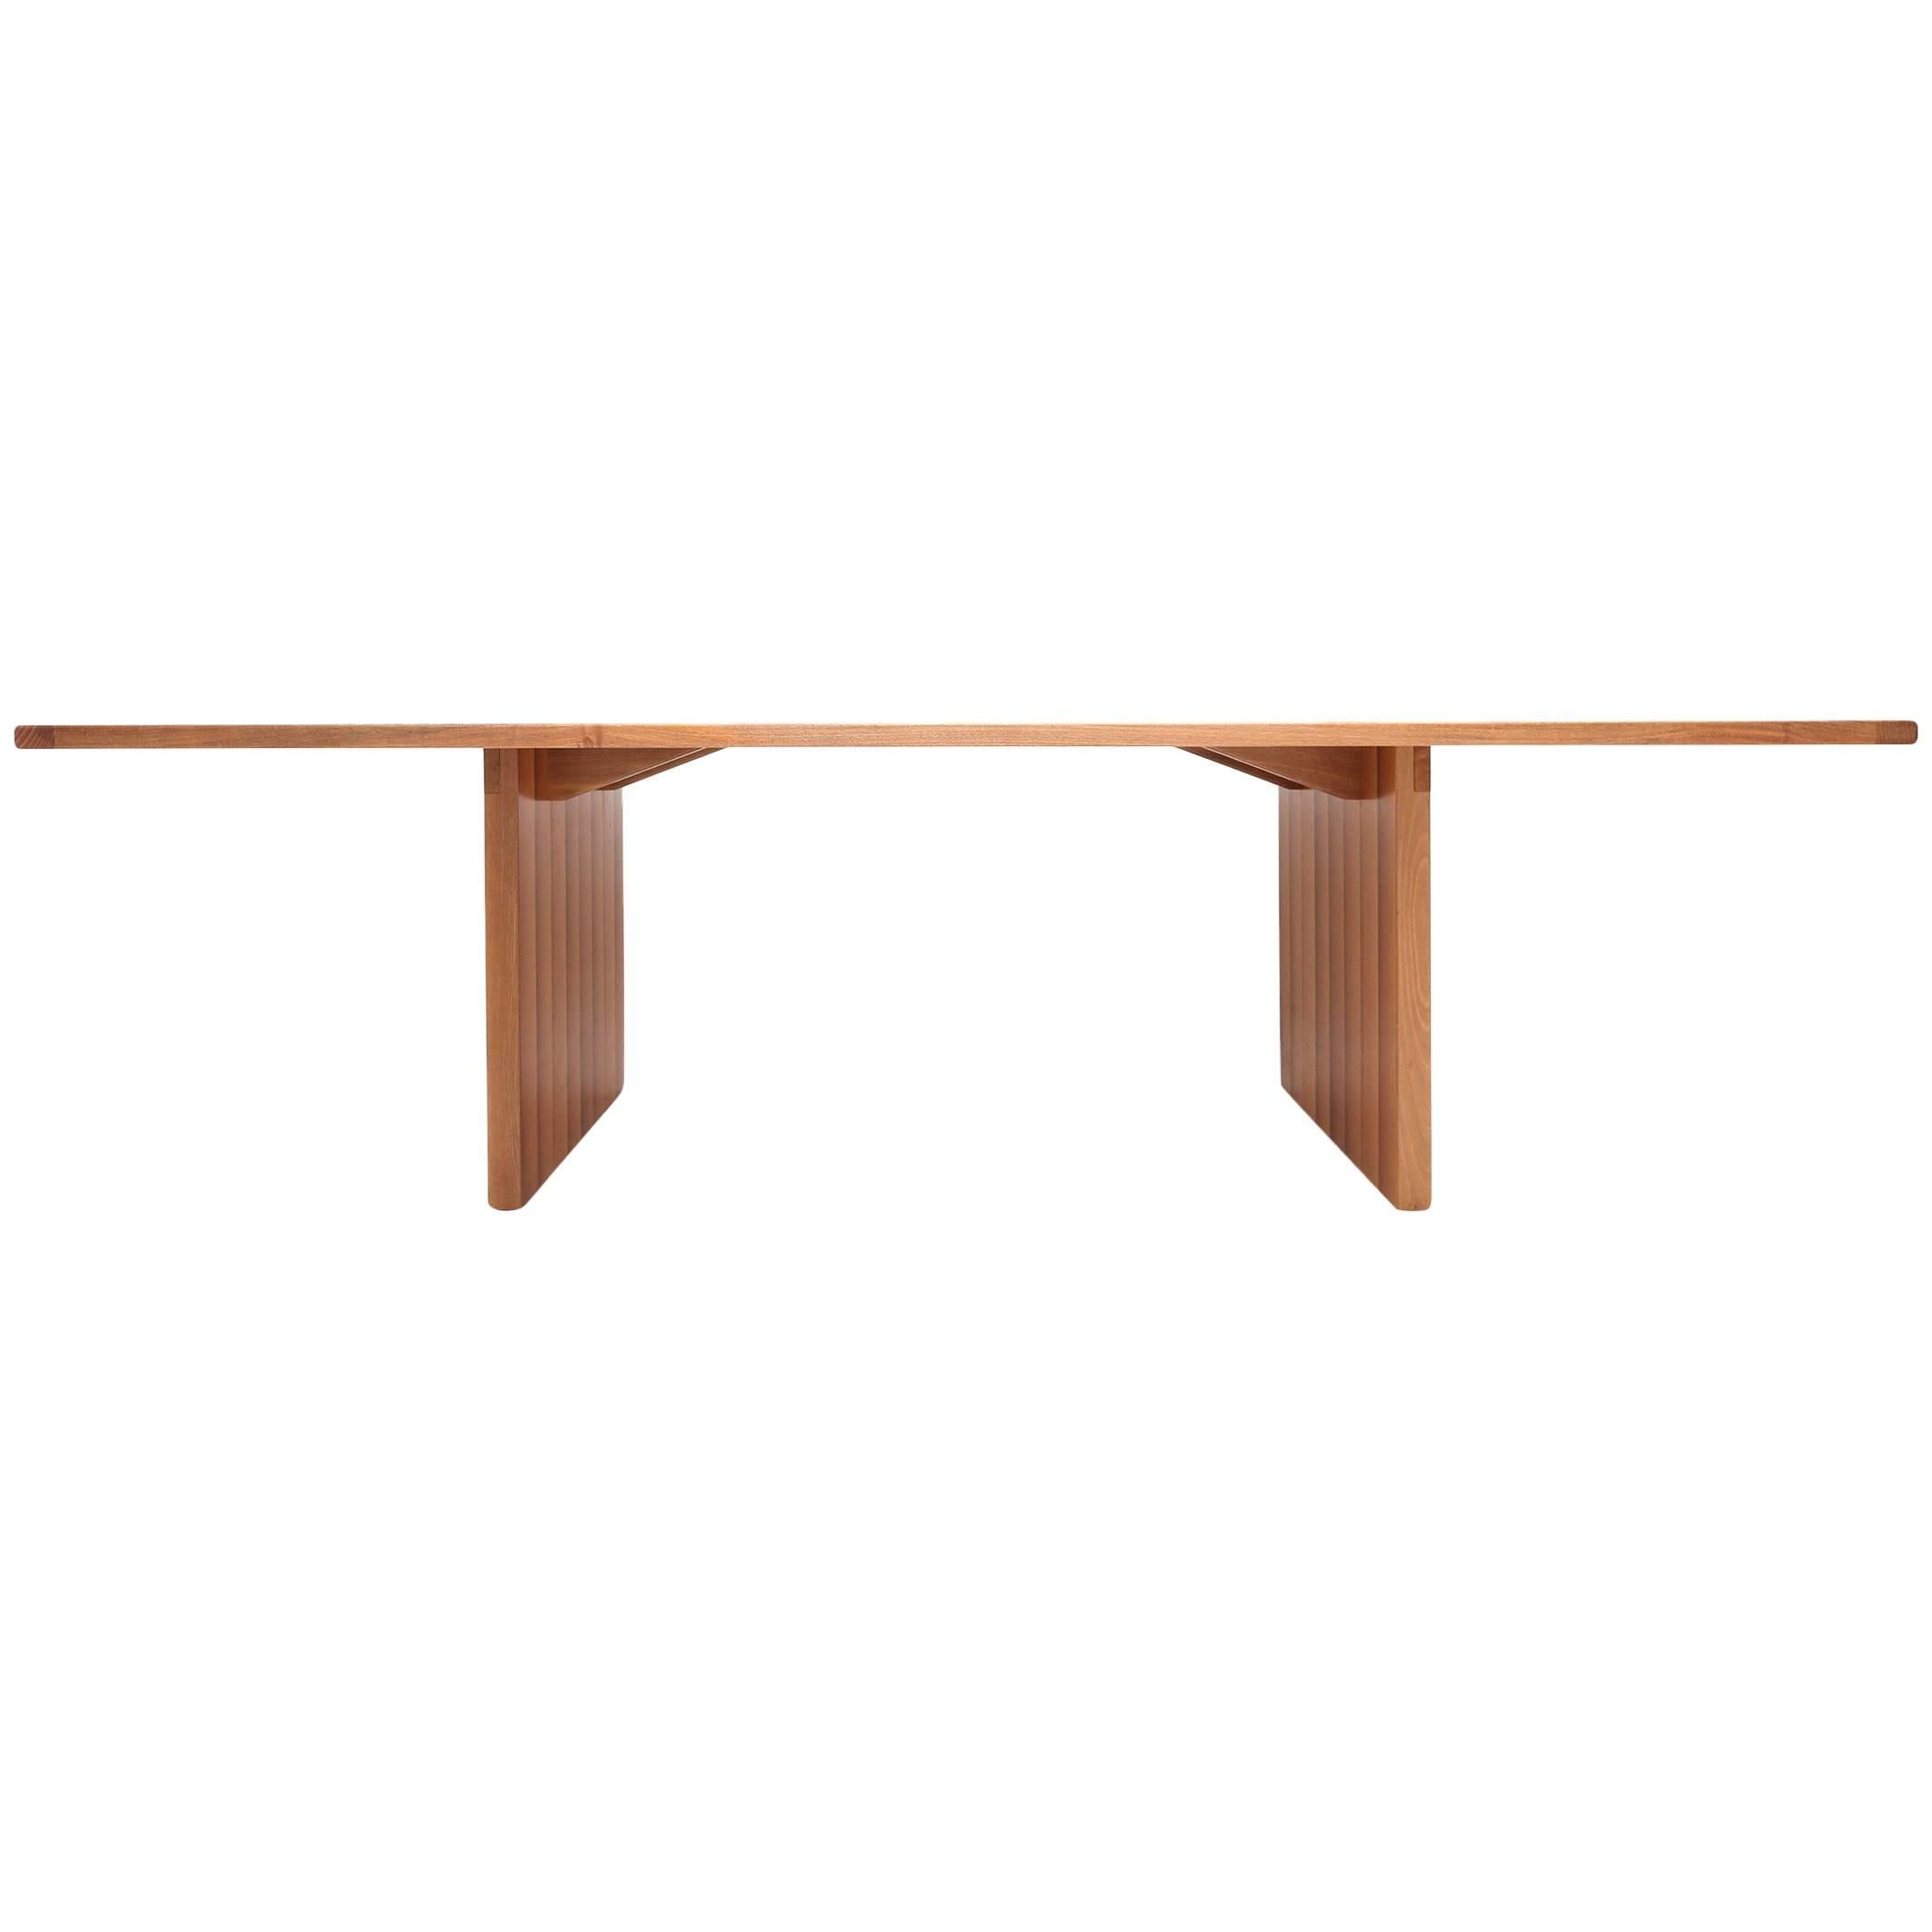 Cassina Limited Edition 'La Barca' Dining Table